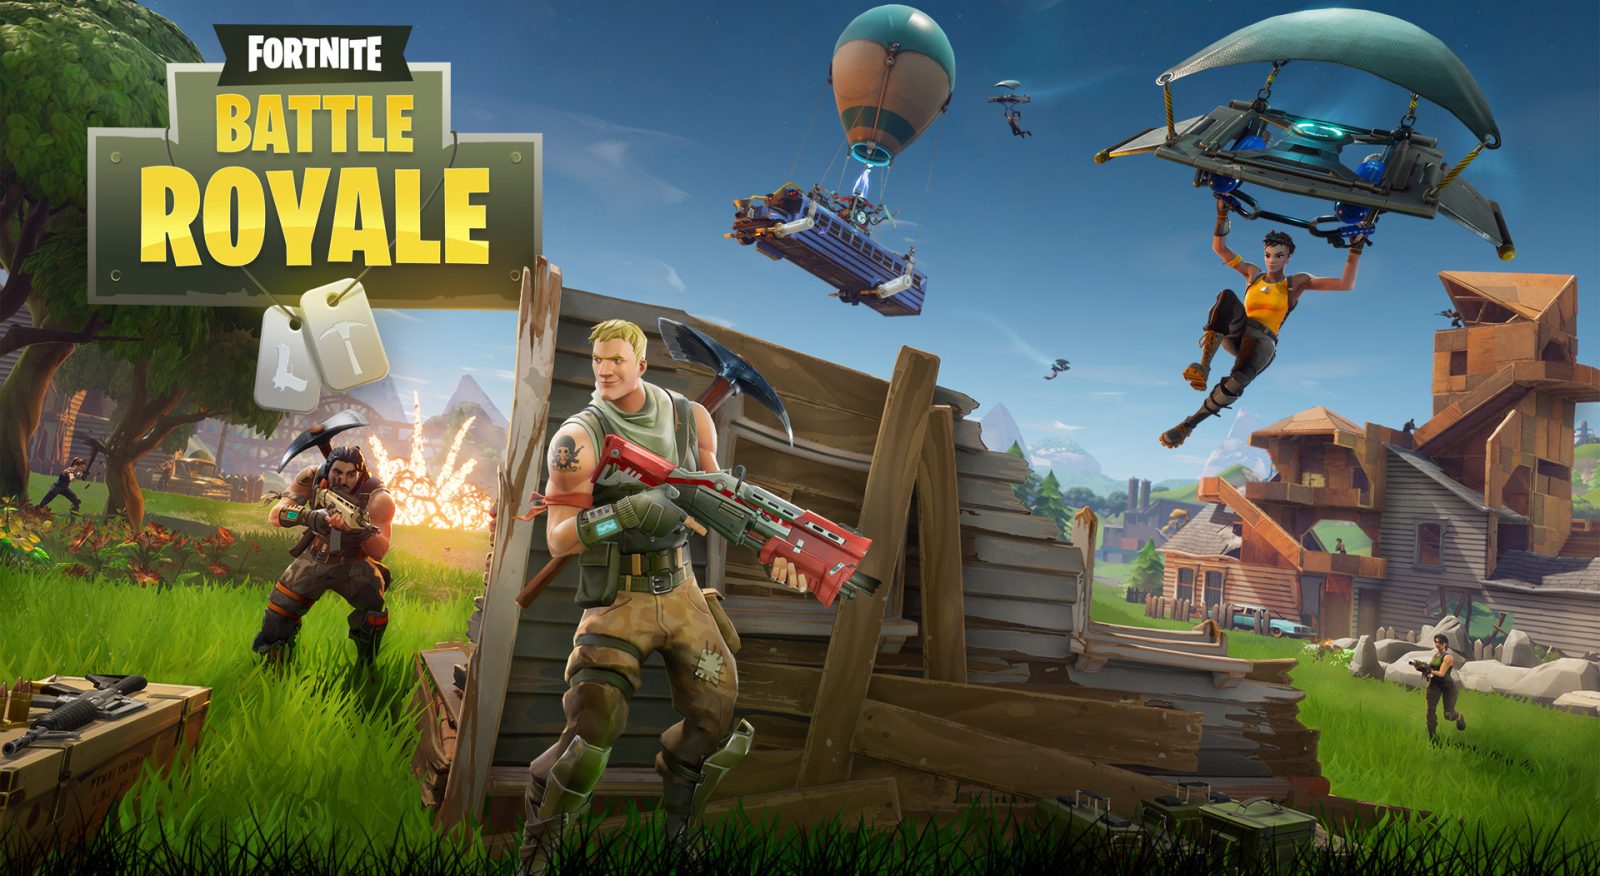 you can play fortnite on nintendo switch for free download now on the eshop - nintendo switch kostenloser download fortnite